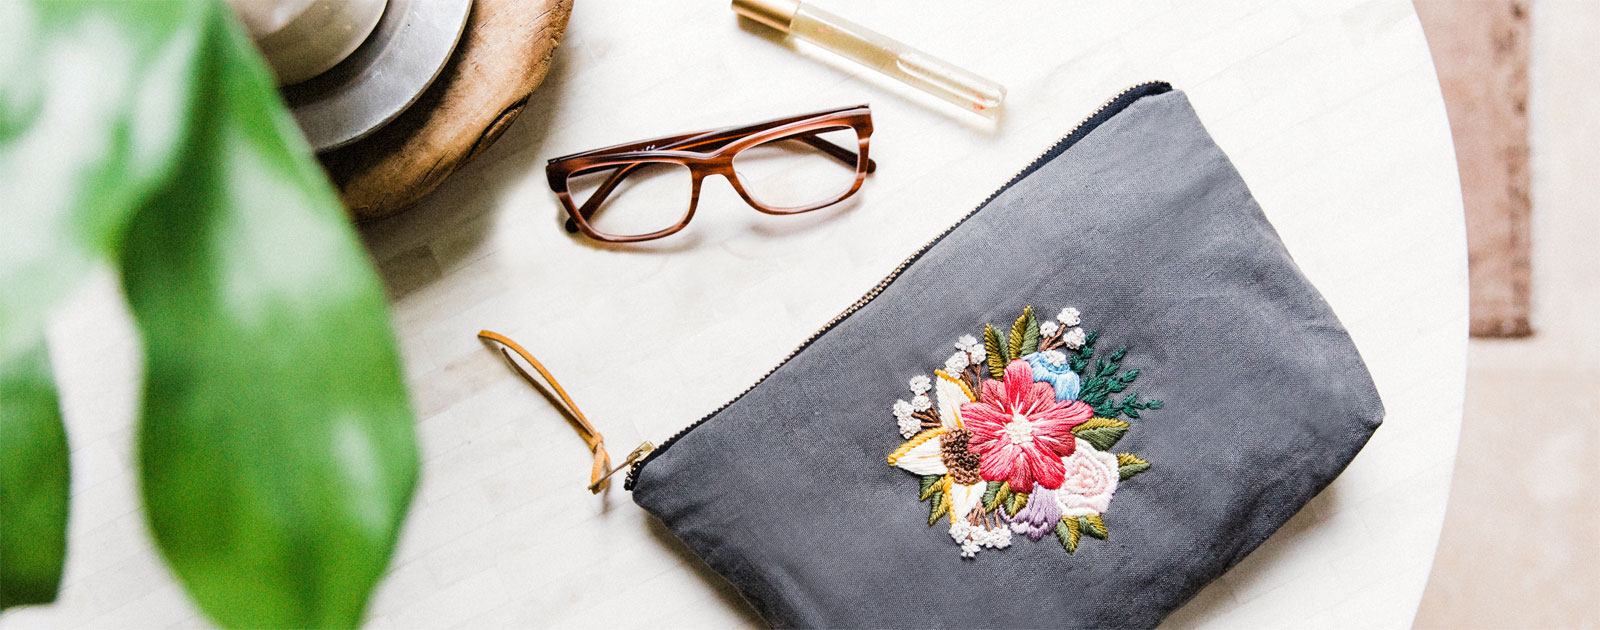 Embellishing with Floral Embroidery | Kristen Gula